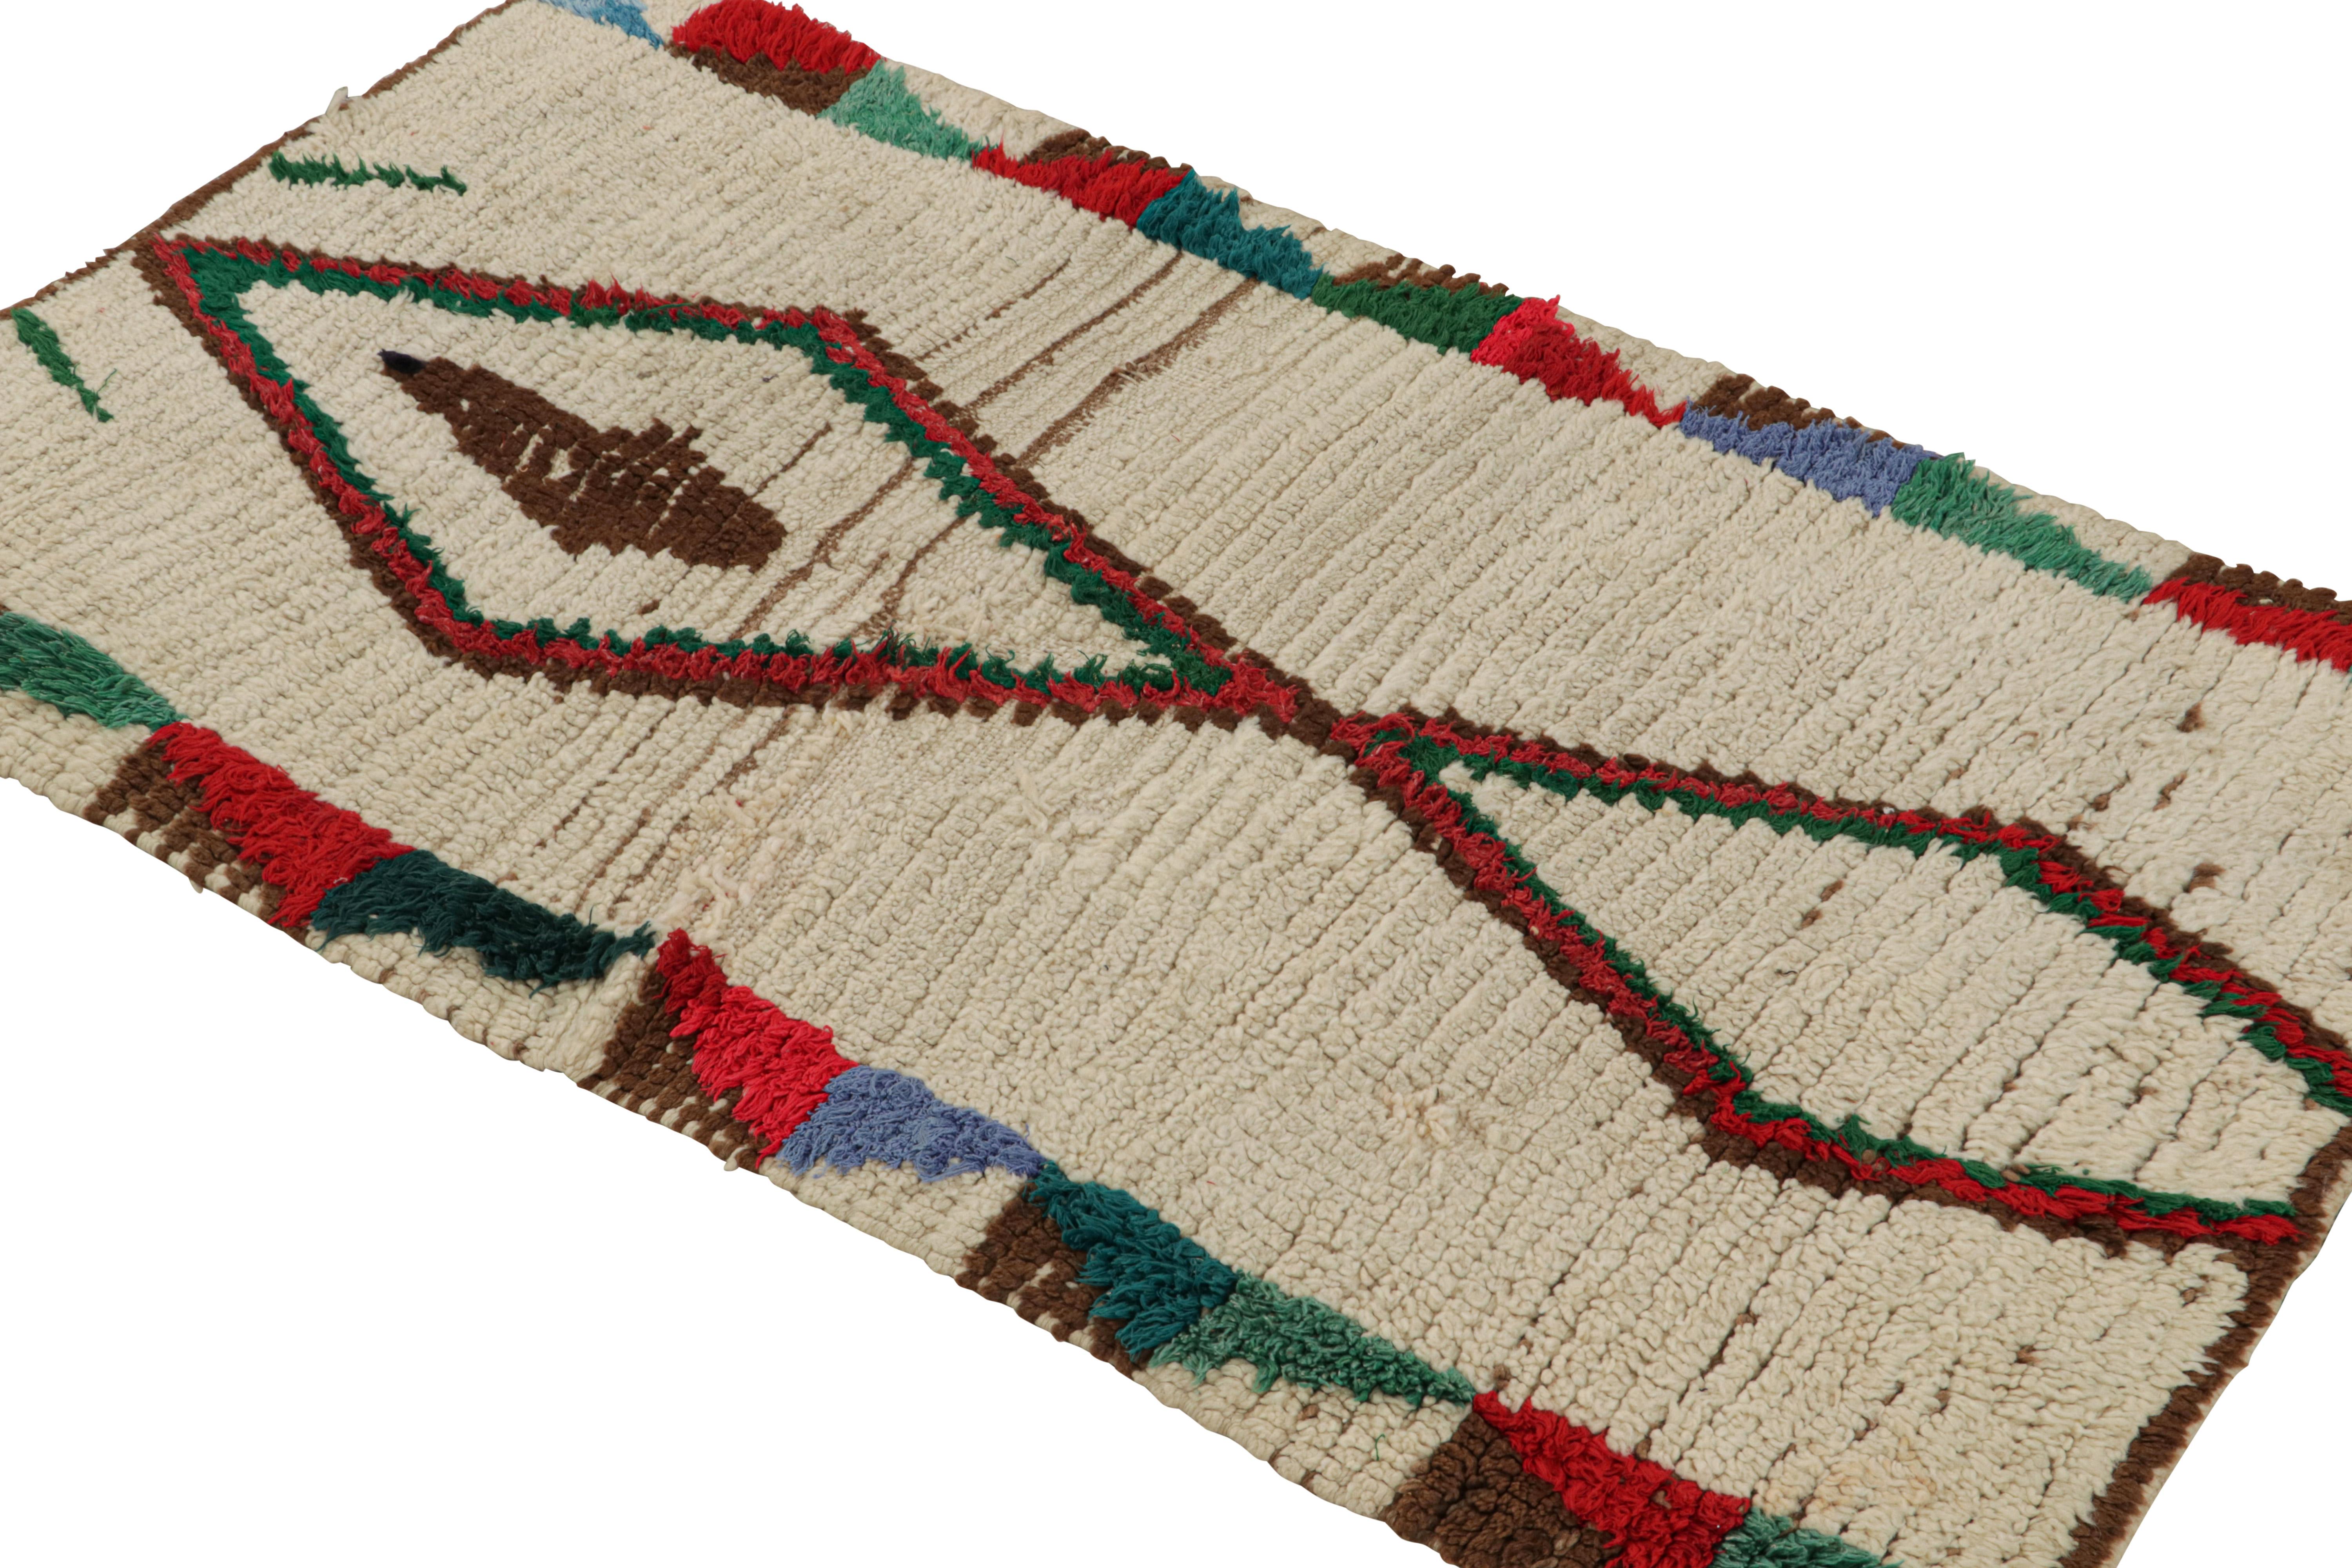 Hand-knotted in wool circa 1950-1960, this vintage 3x5 Moroccan Scatter rug is believed to hail from the Azilal tribe. 

On the Design: 

This rug enjoys red-green and brown patterns on beige. Keen eyes will further admire its healthy pile—exemplary